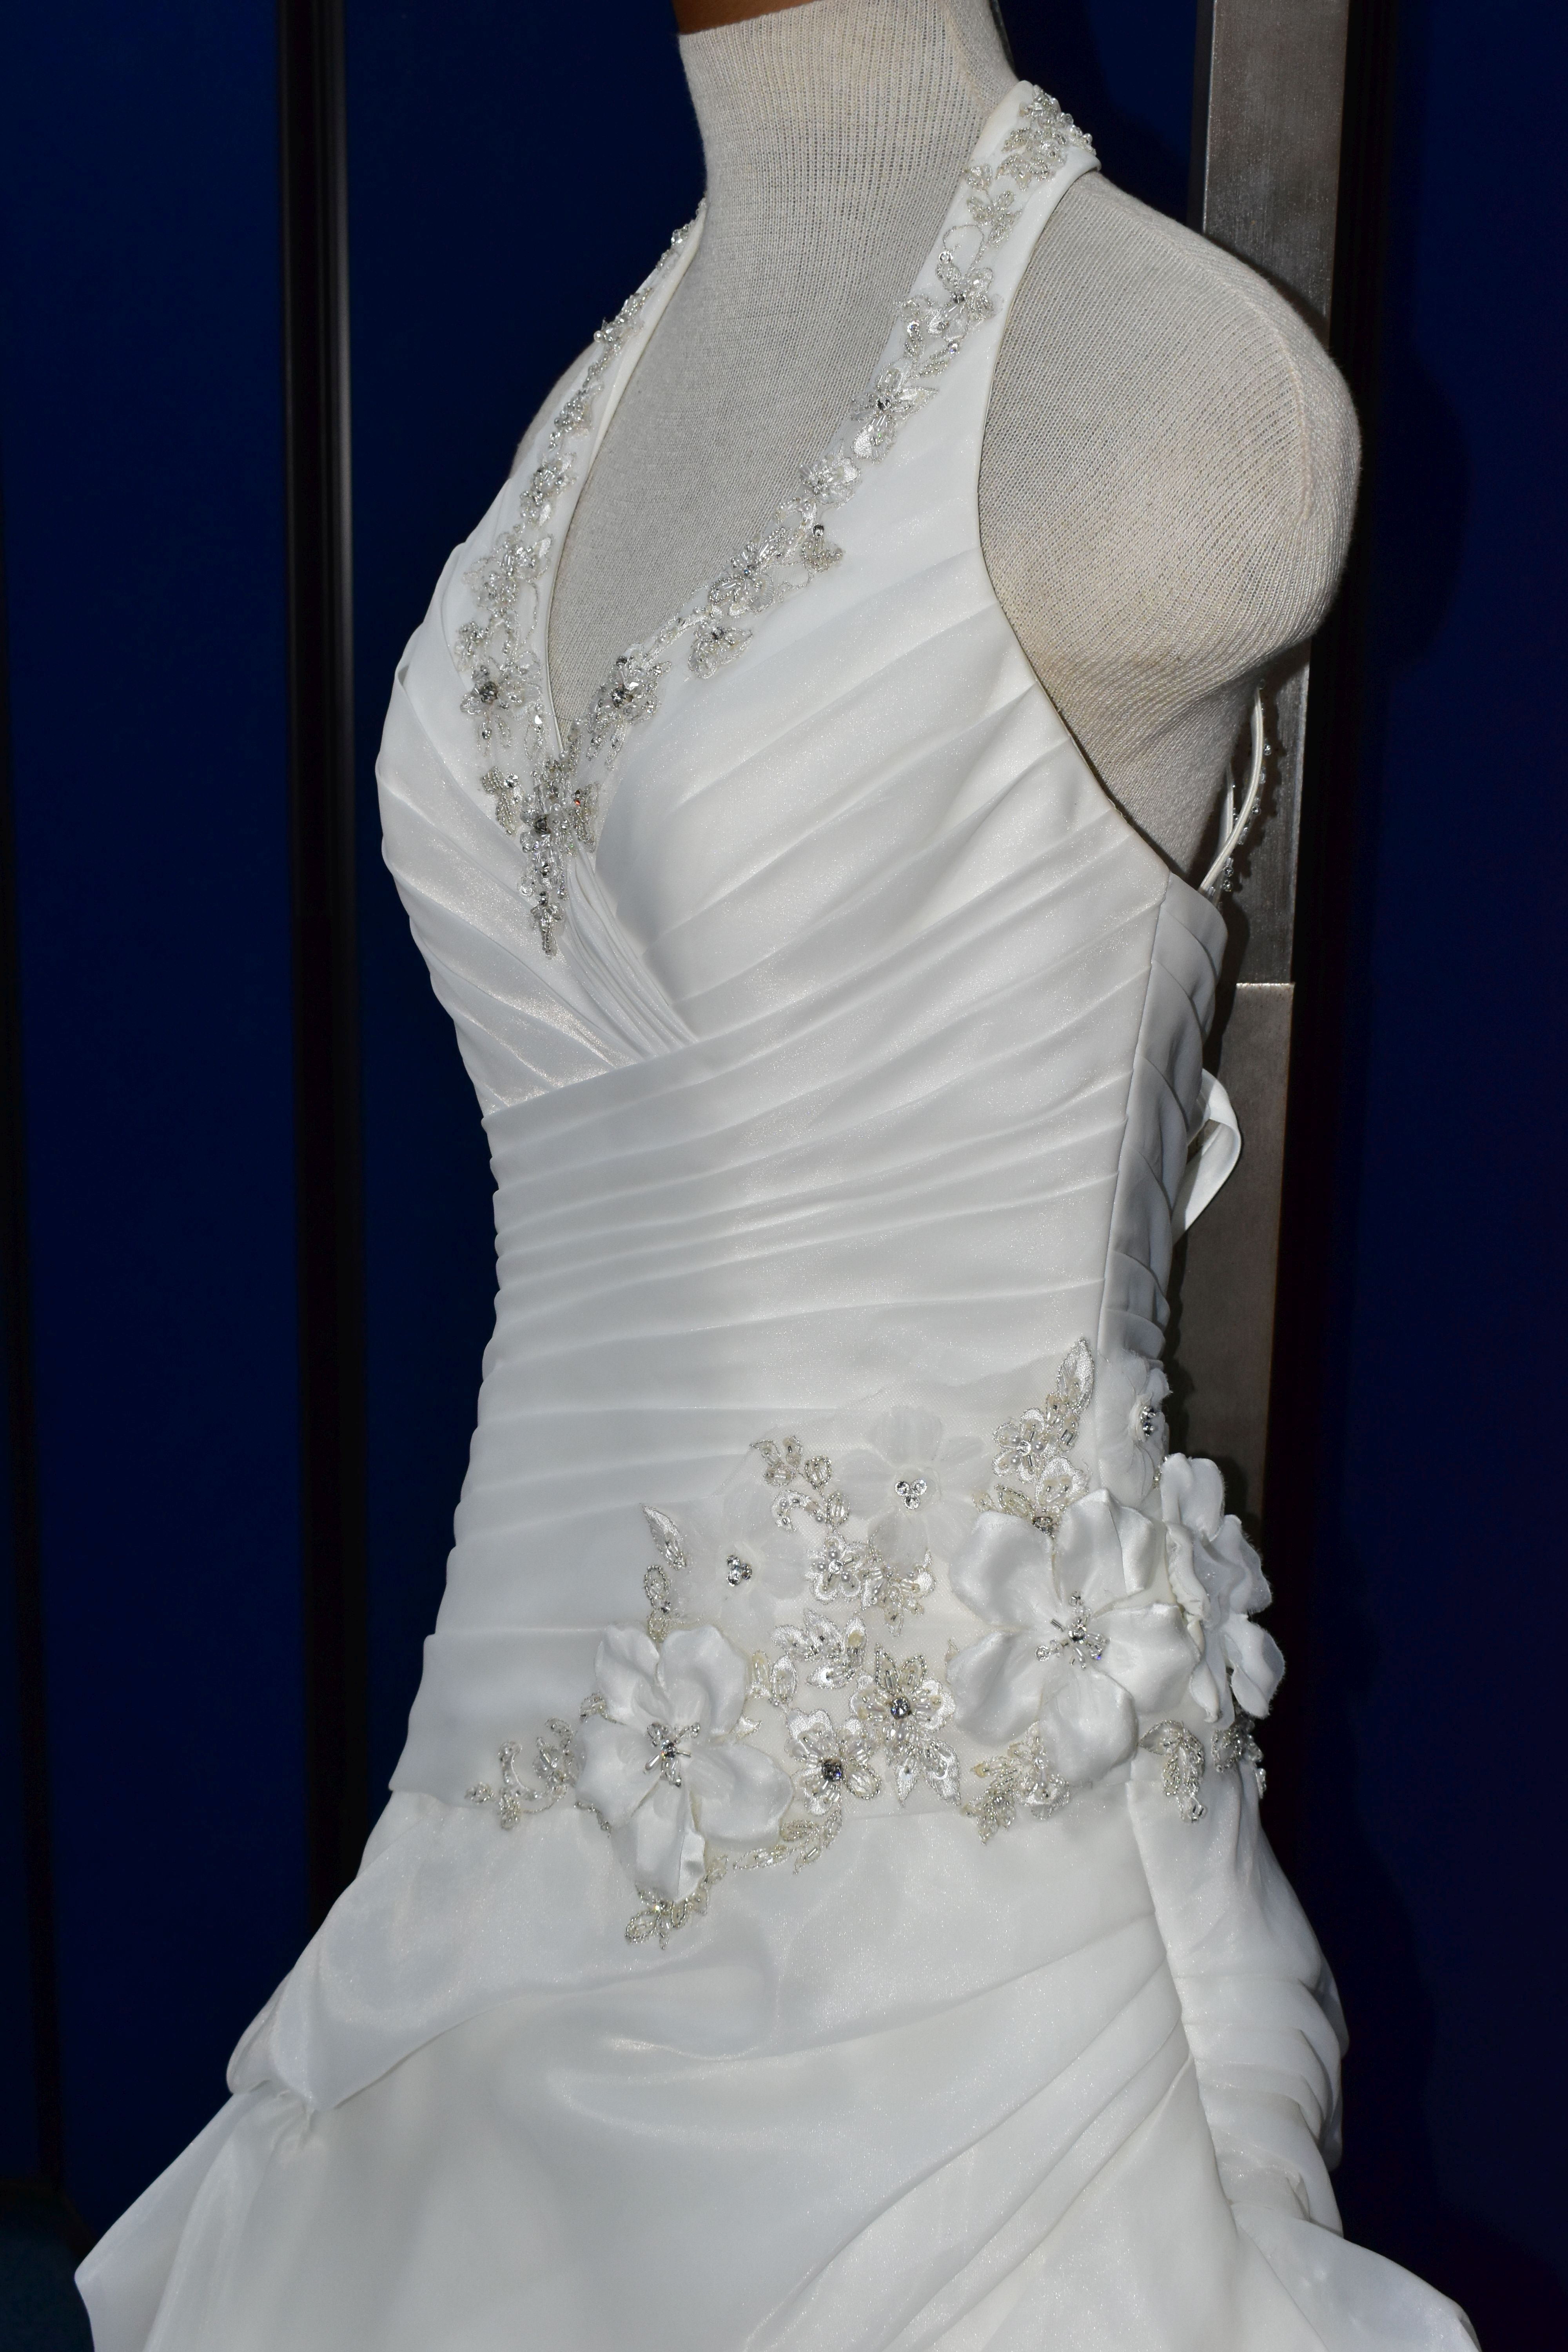 WEDDING GOWN, 'Kenneth Winston' Private Label by G, size 8/10, white pleated bodice, halter neck, - Image 10 of 17